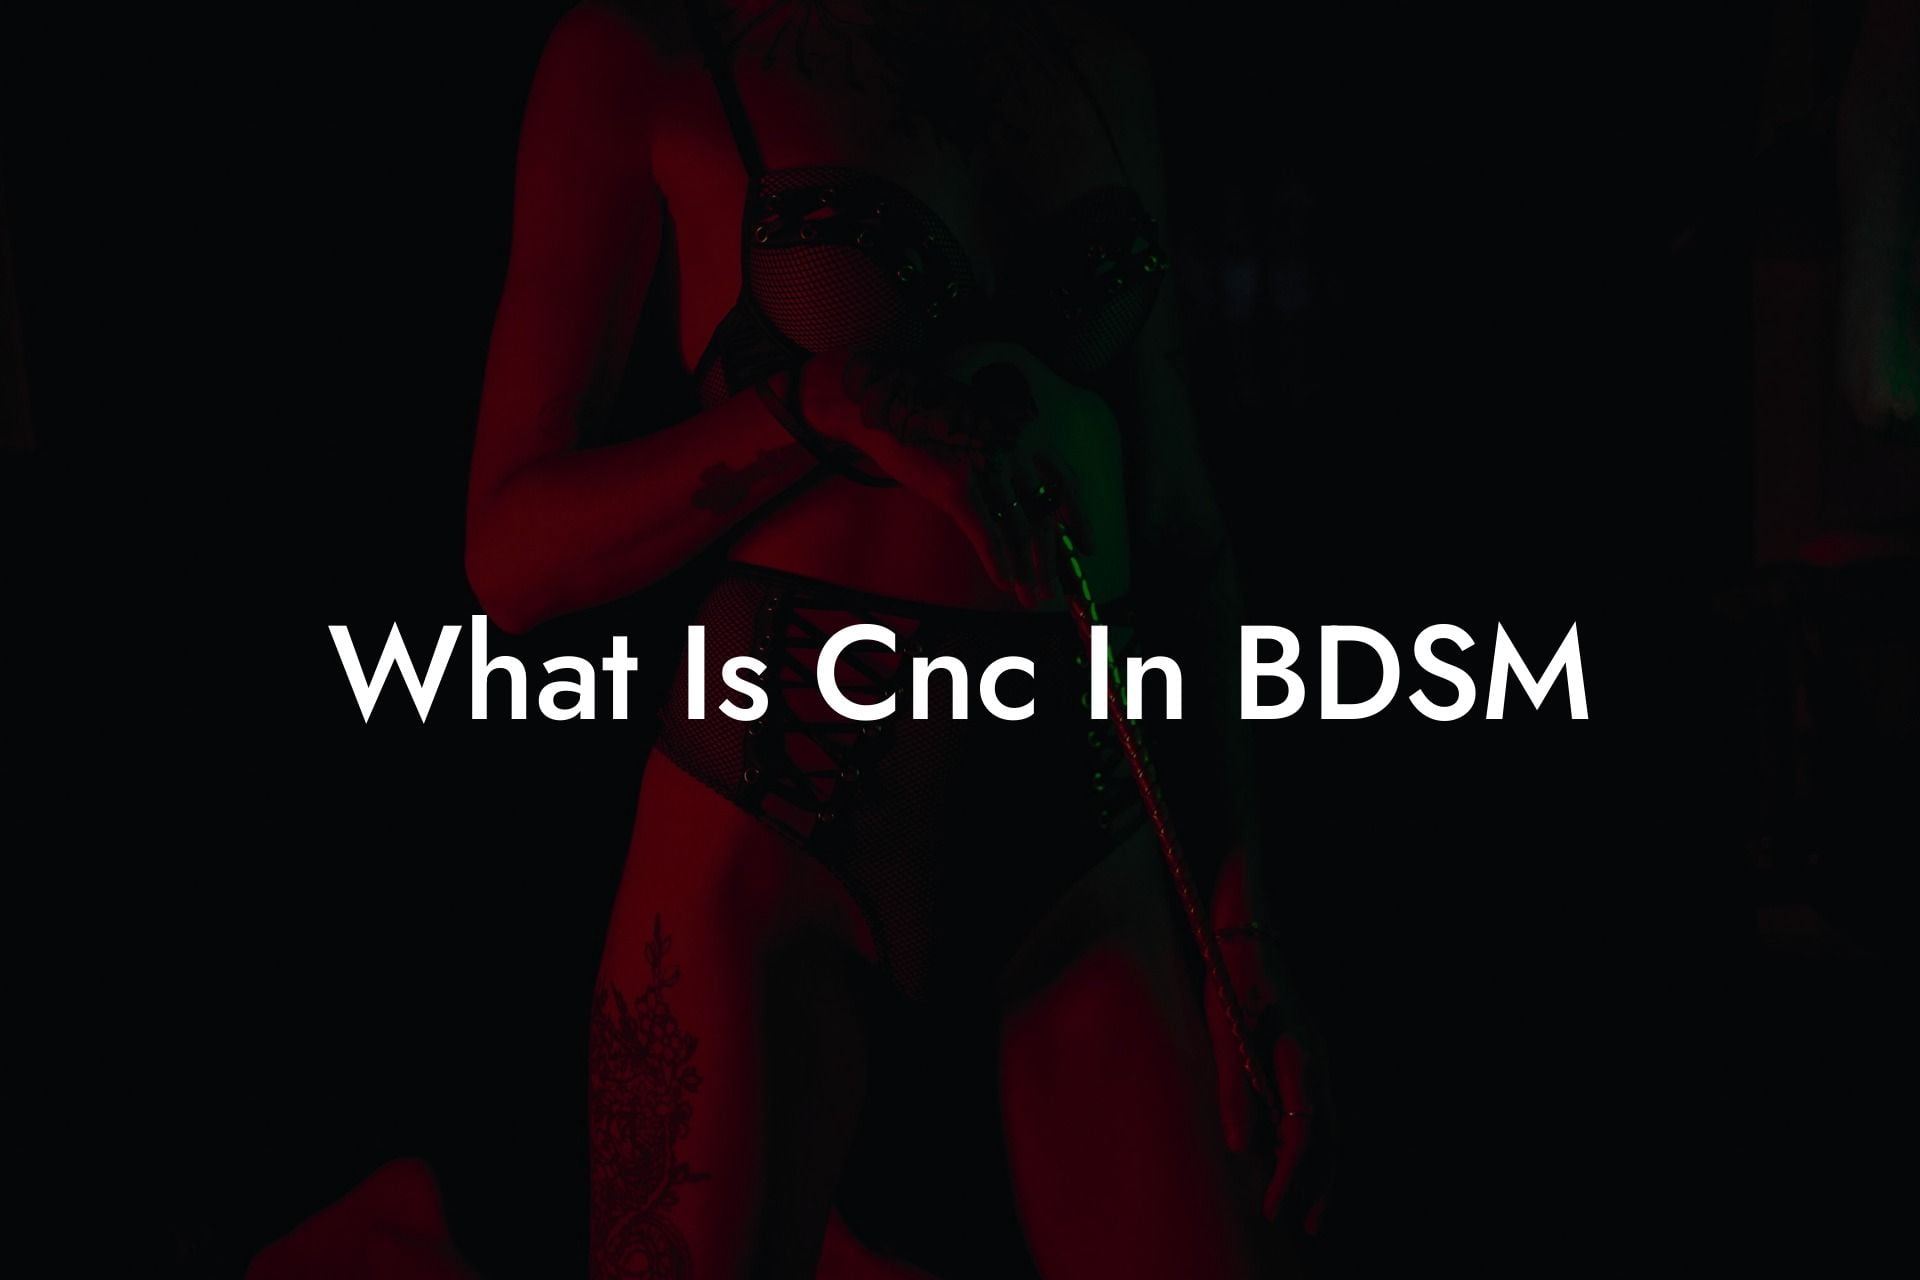 What Is Cnc In BDSM